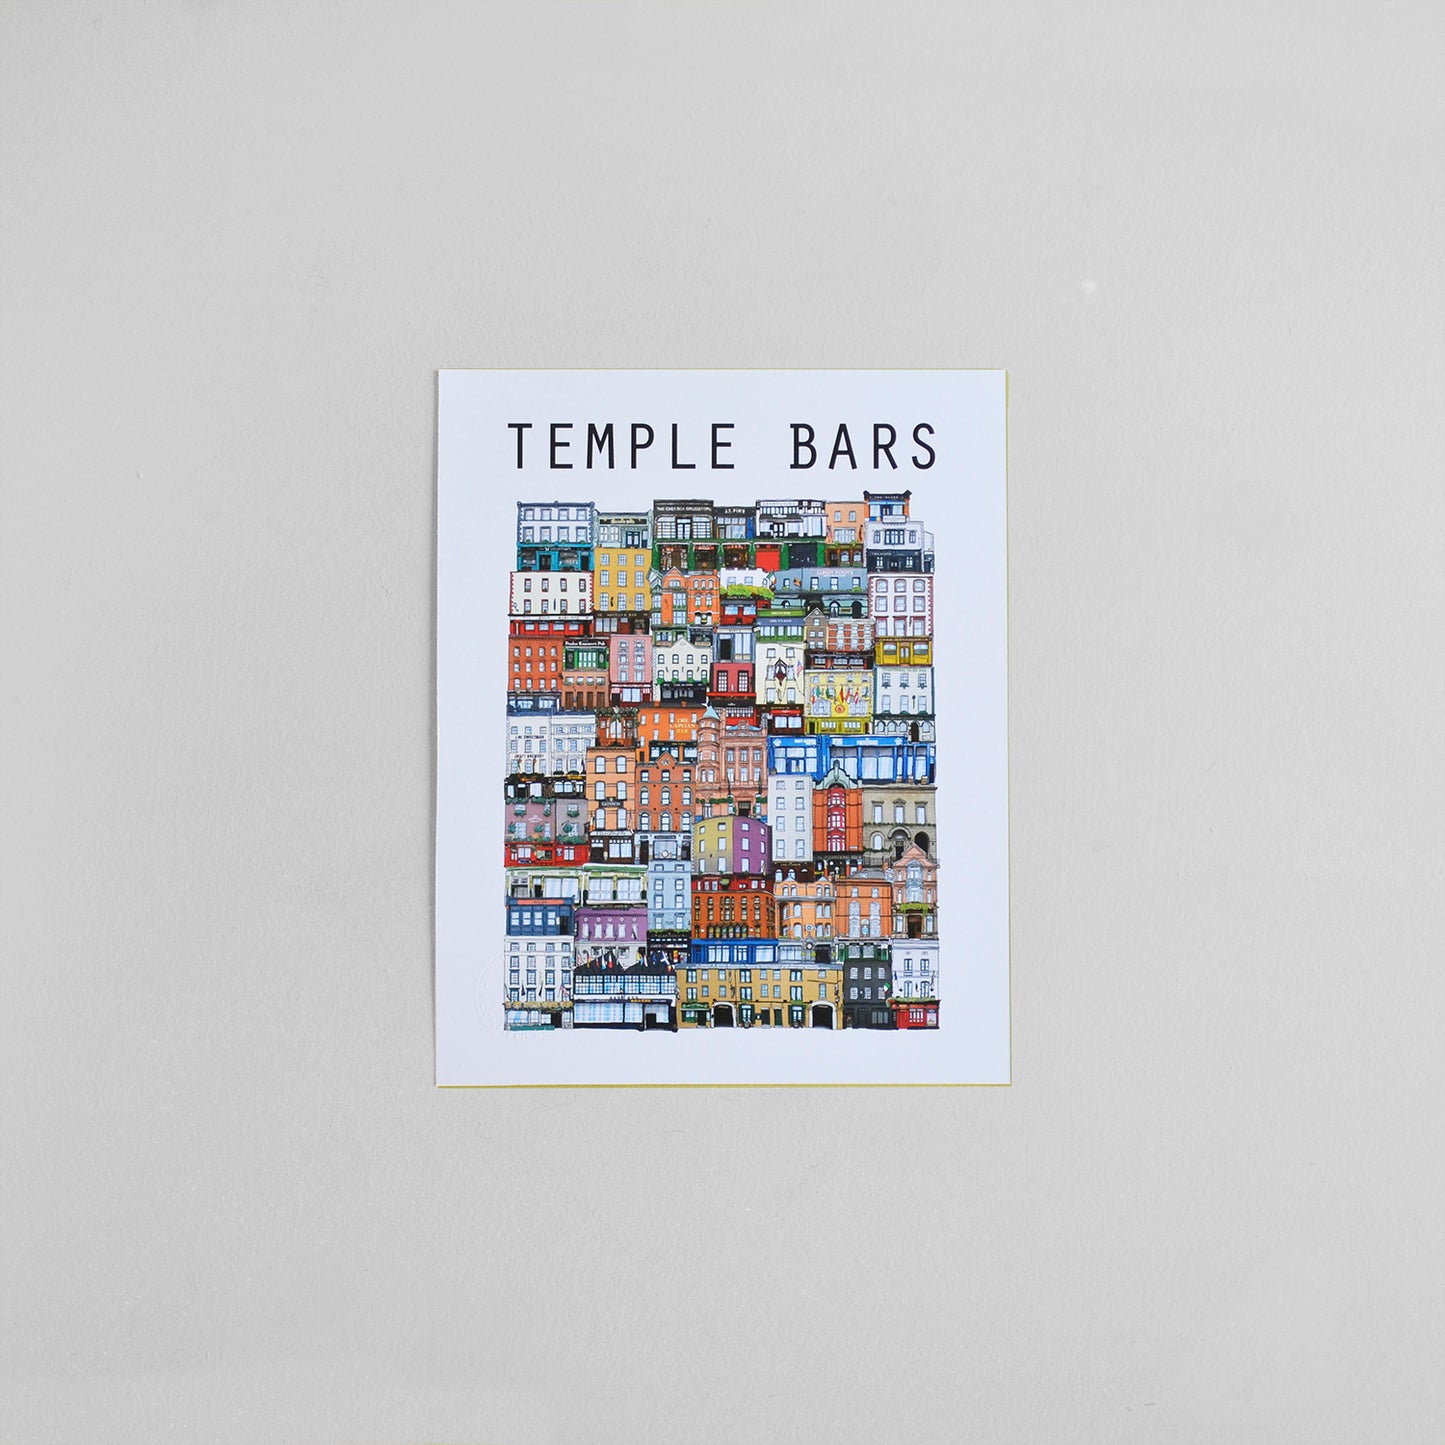 8x10 inch Unframed Temple Bars